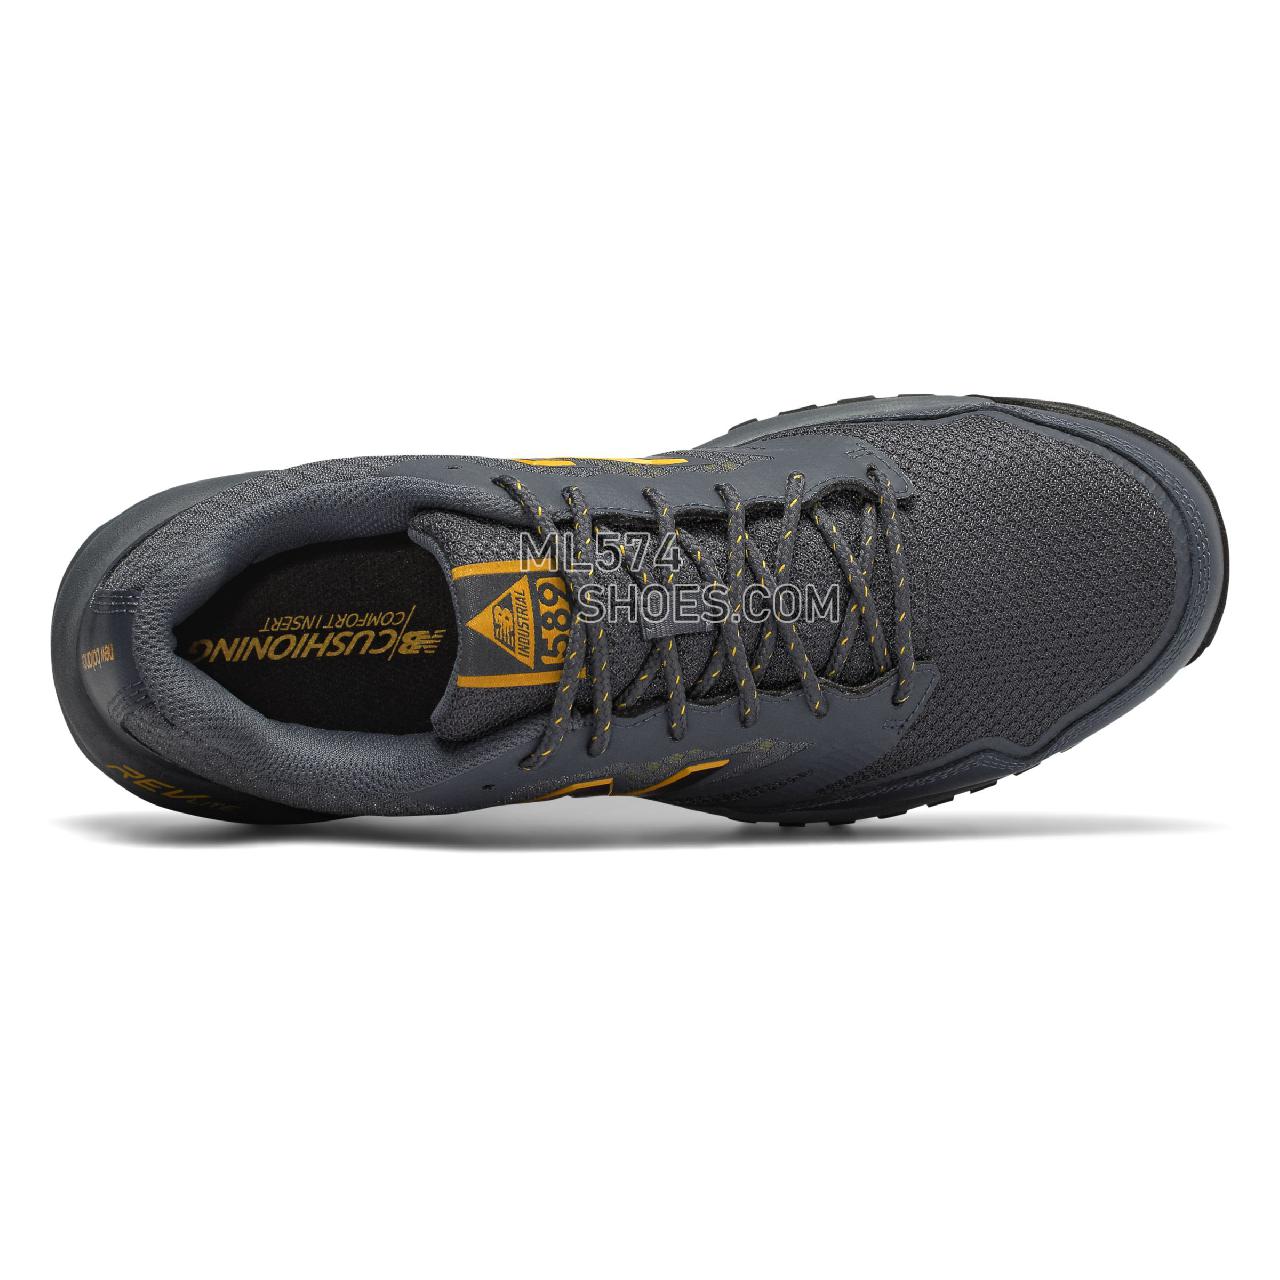 New Balance Composite Toe 589 - Men's Work - Chalkboard with Sunflower and Light Cliff Grey - MID589LC